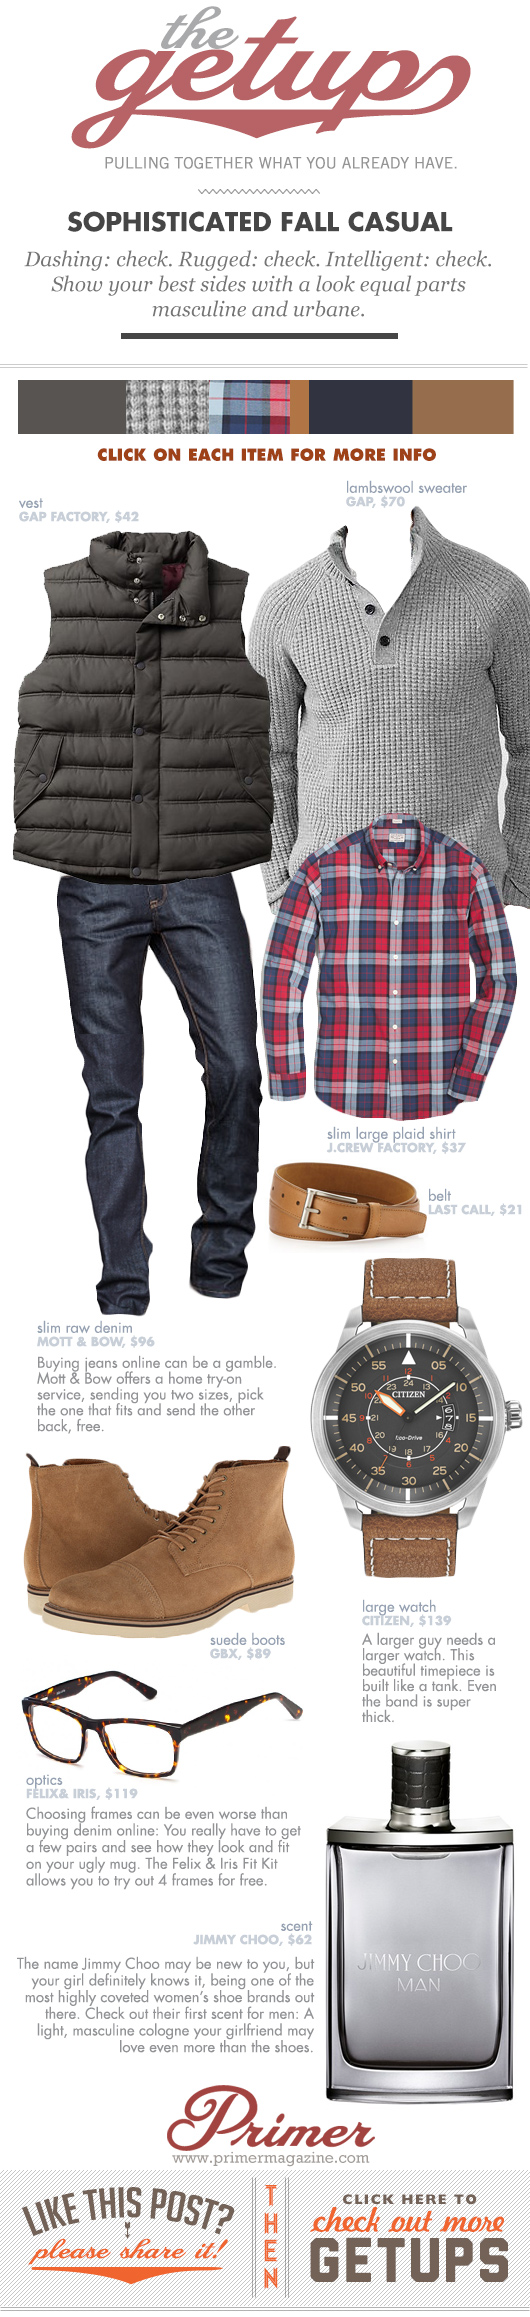 Getup Sophisticated Fall Casual - Sweater and vest with plaid shirt and jeans